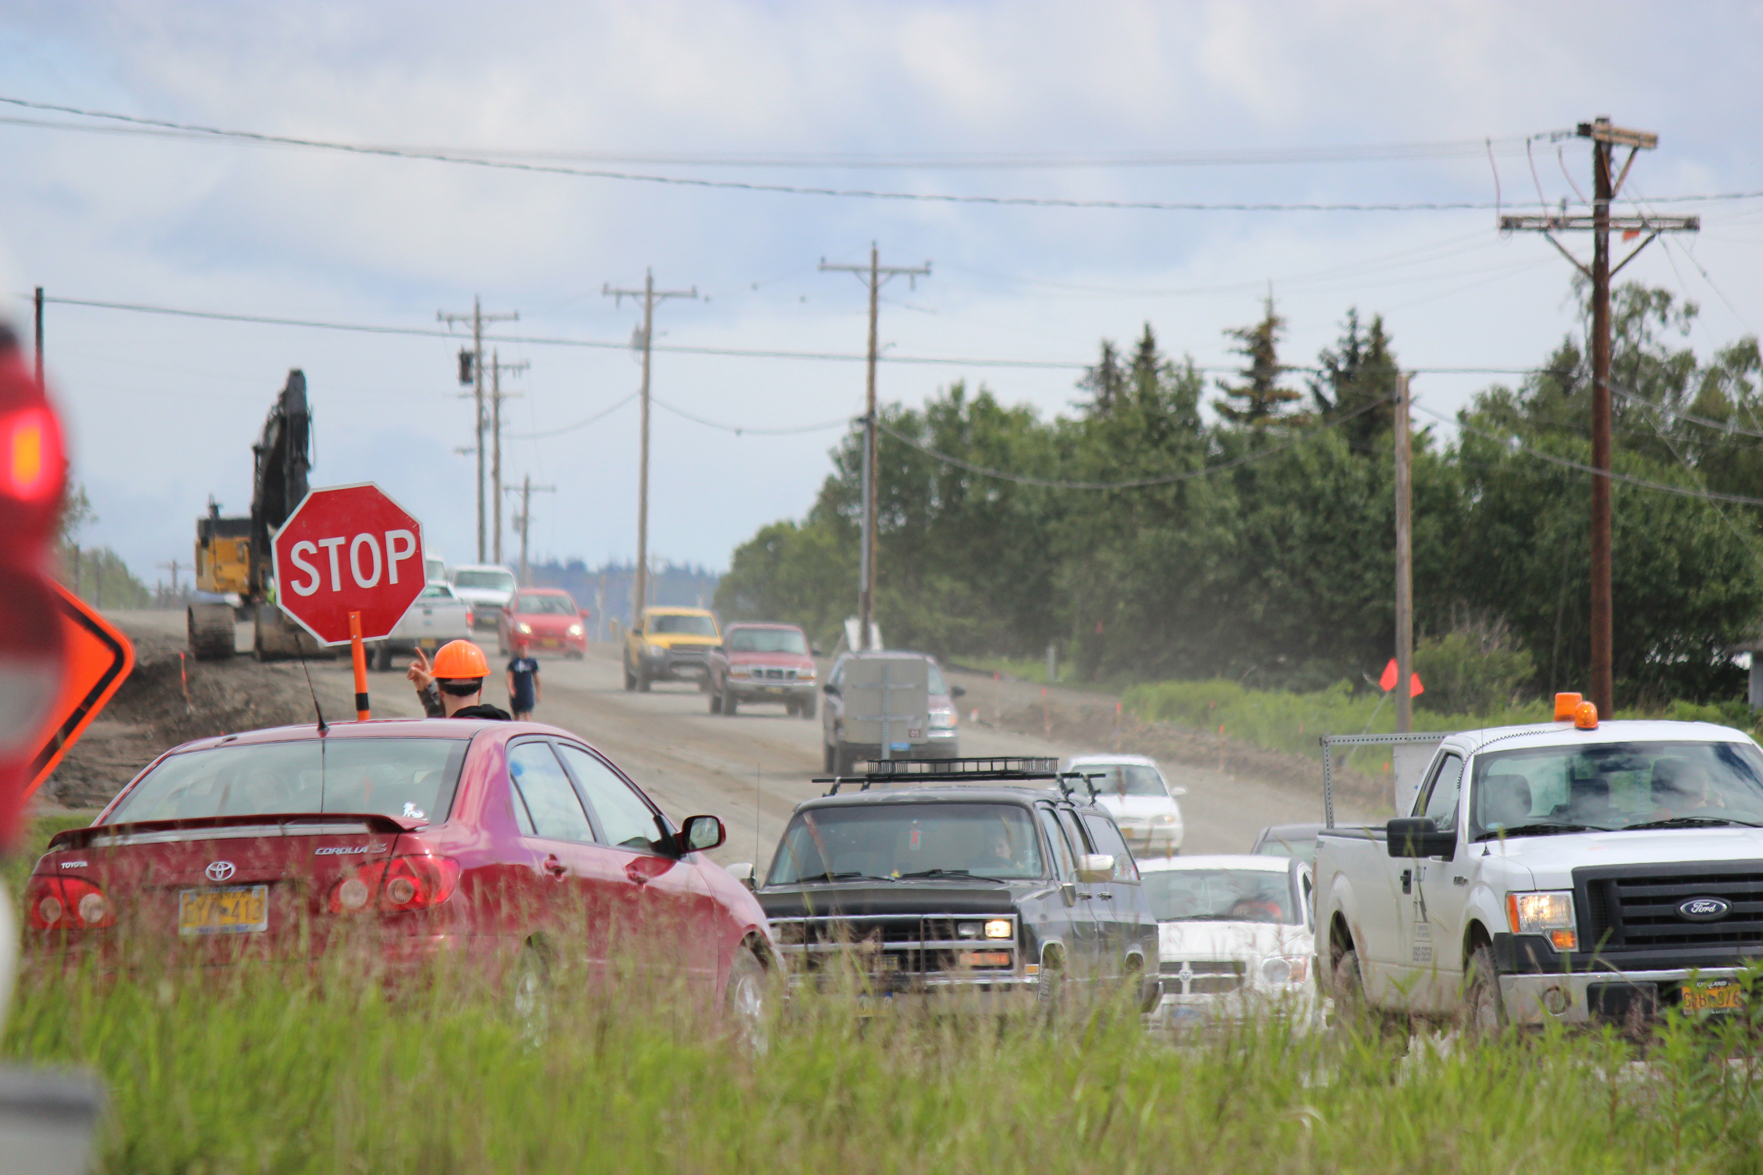 One lane of traffic is halted at the intersection of East End Road and Kachemak Drive on Tuesday, while oncoming traffic maneuvers through road construction activities taking place between mile 3.75-12.1.-Photo by McKibben Jackinsky,  Homer News